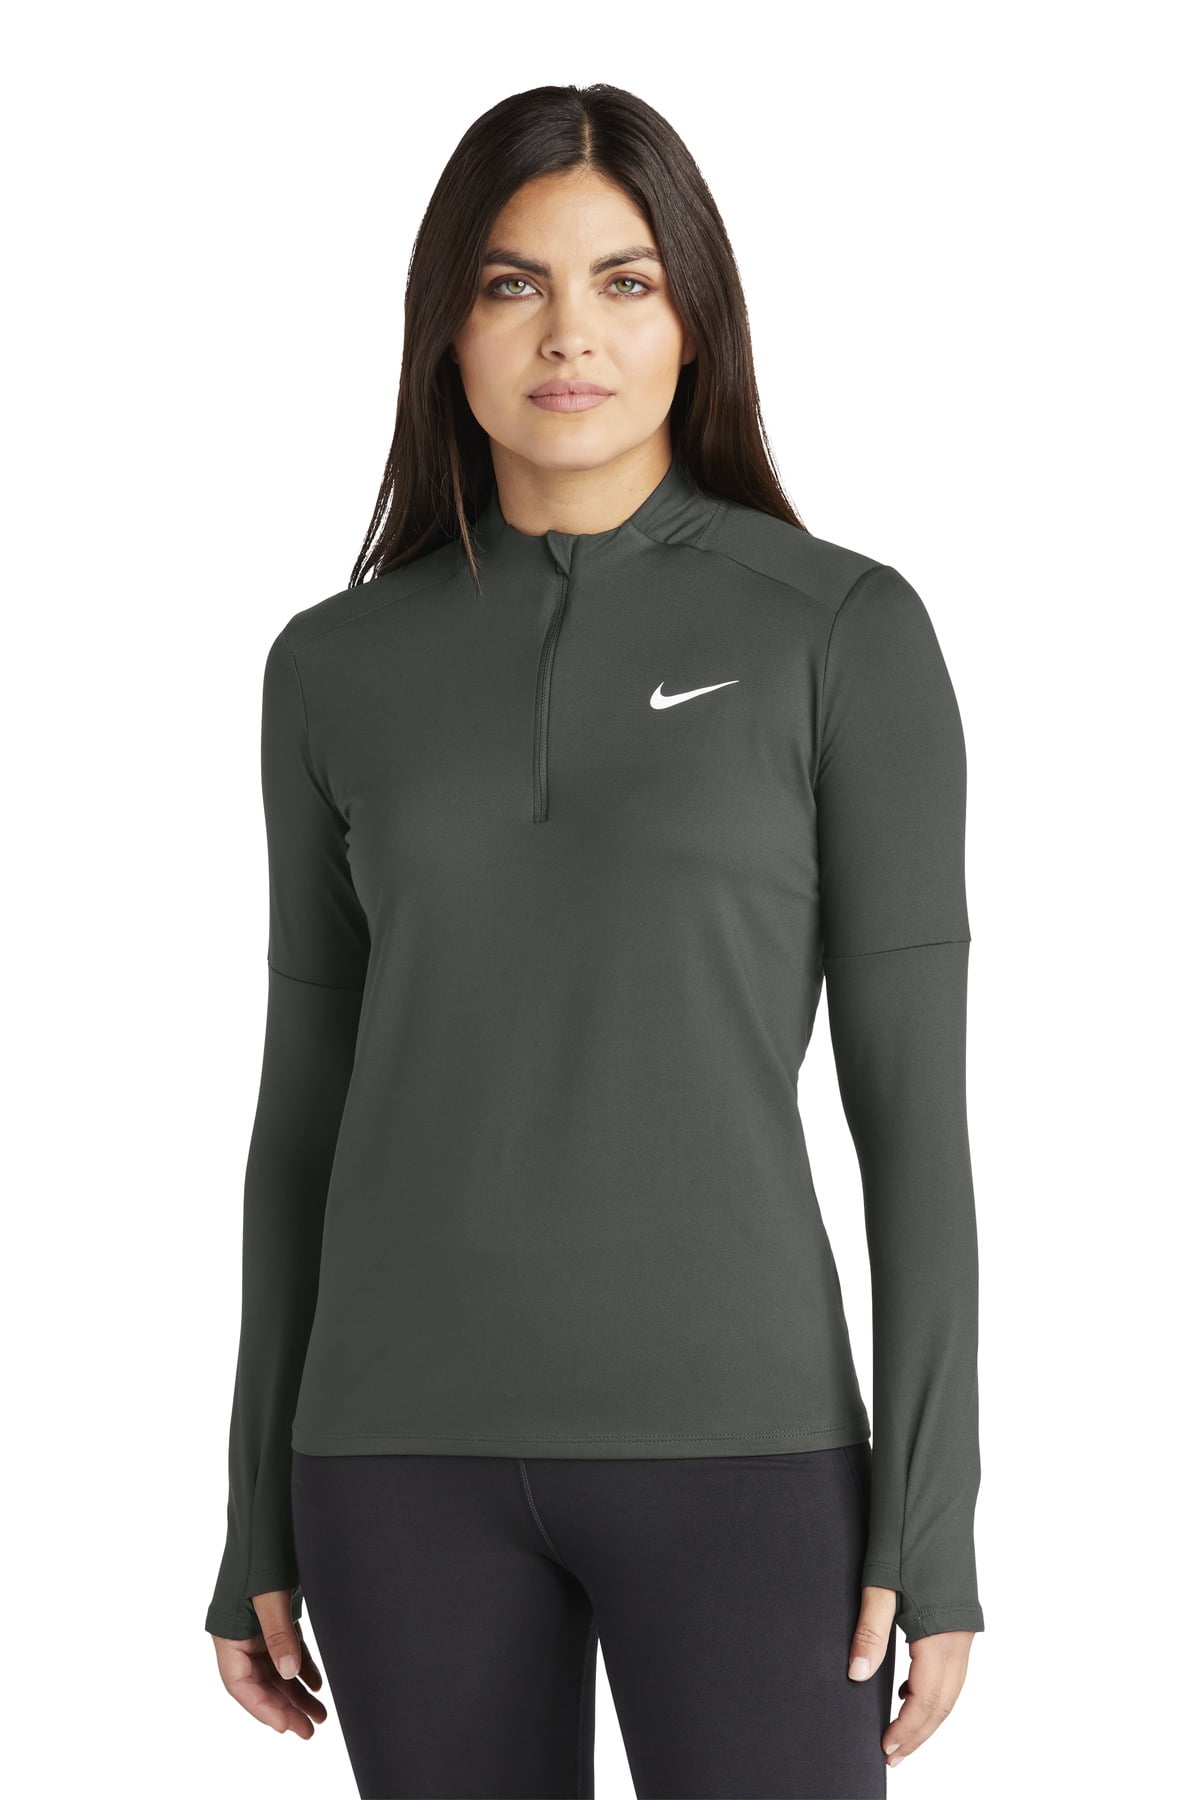 DH4951 Nike Dri-Fit Element Sleeve zip top Anthracite/White S Walmart.com